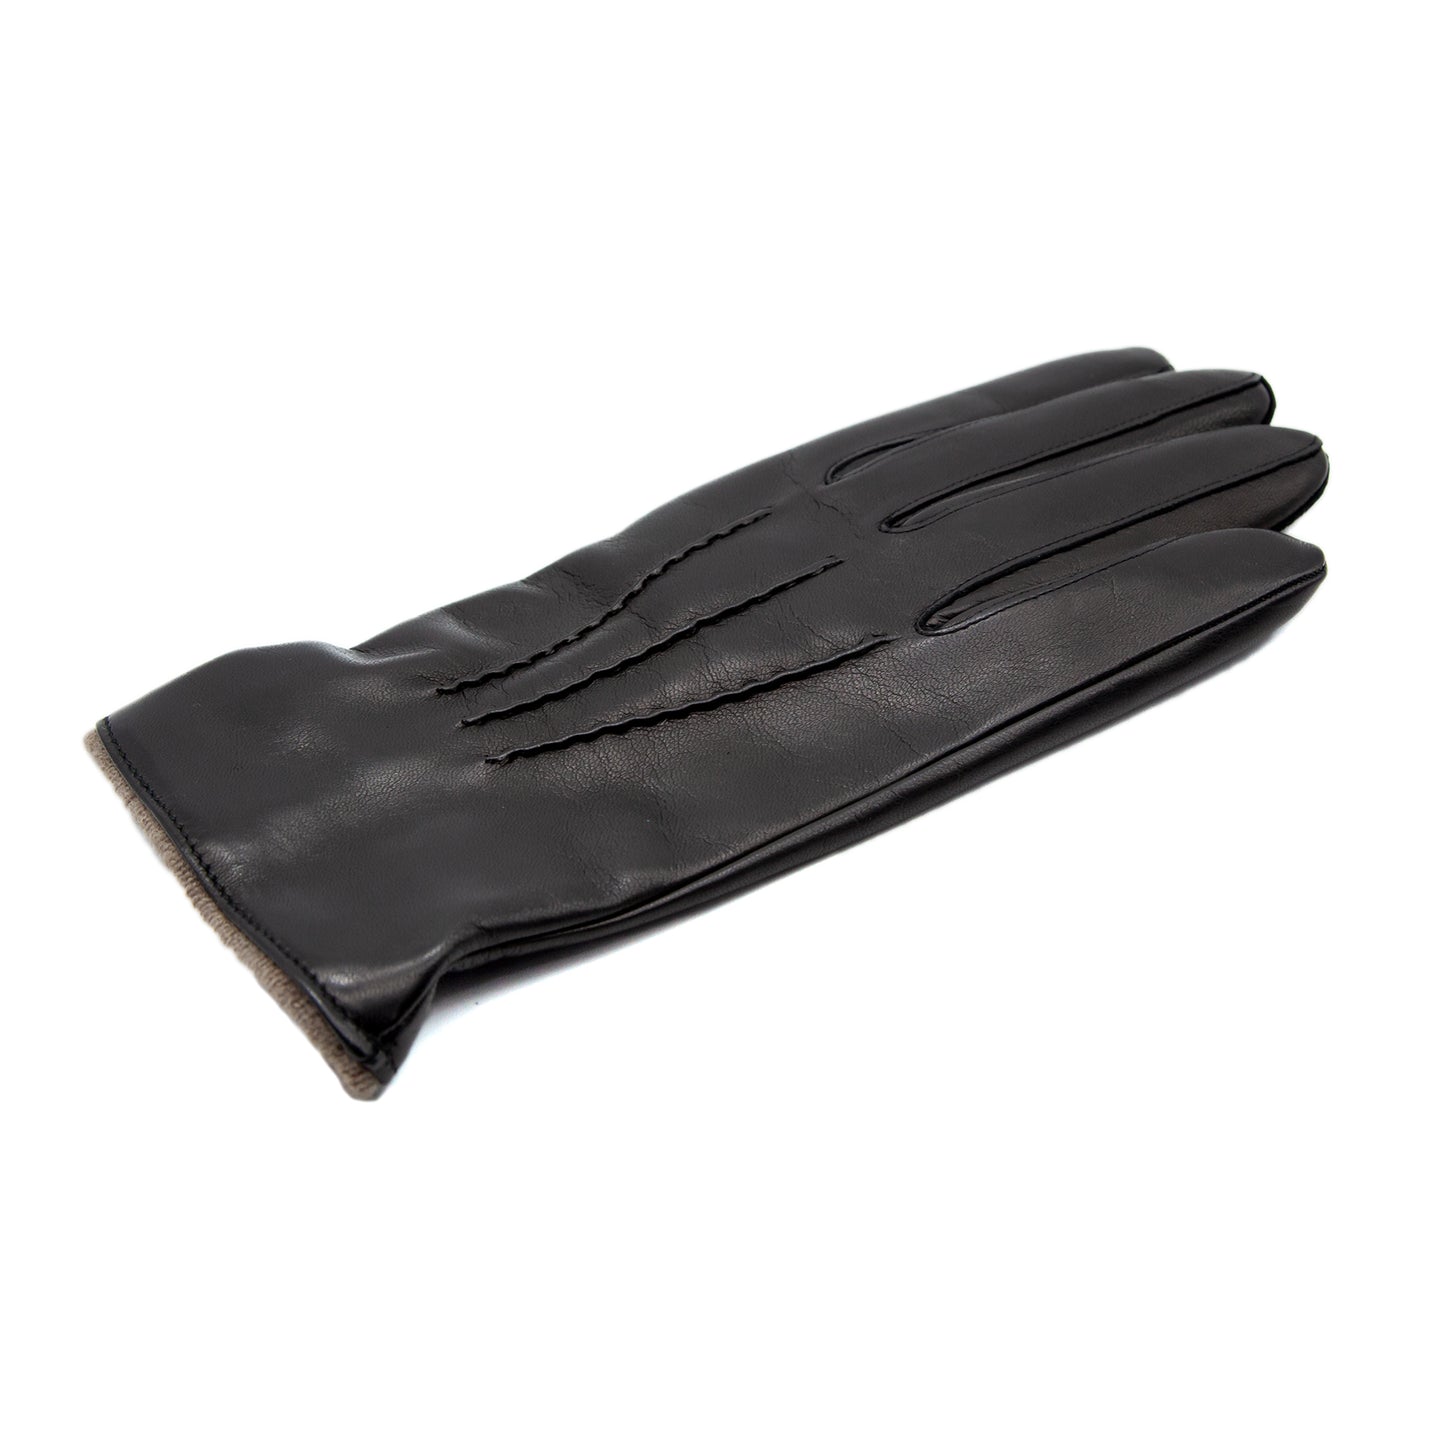 Men's black nappa leather gloves and cashmere lining